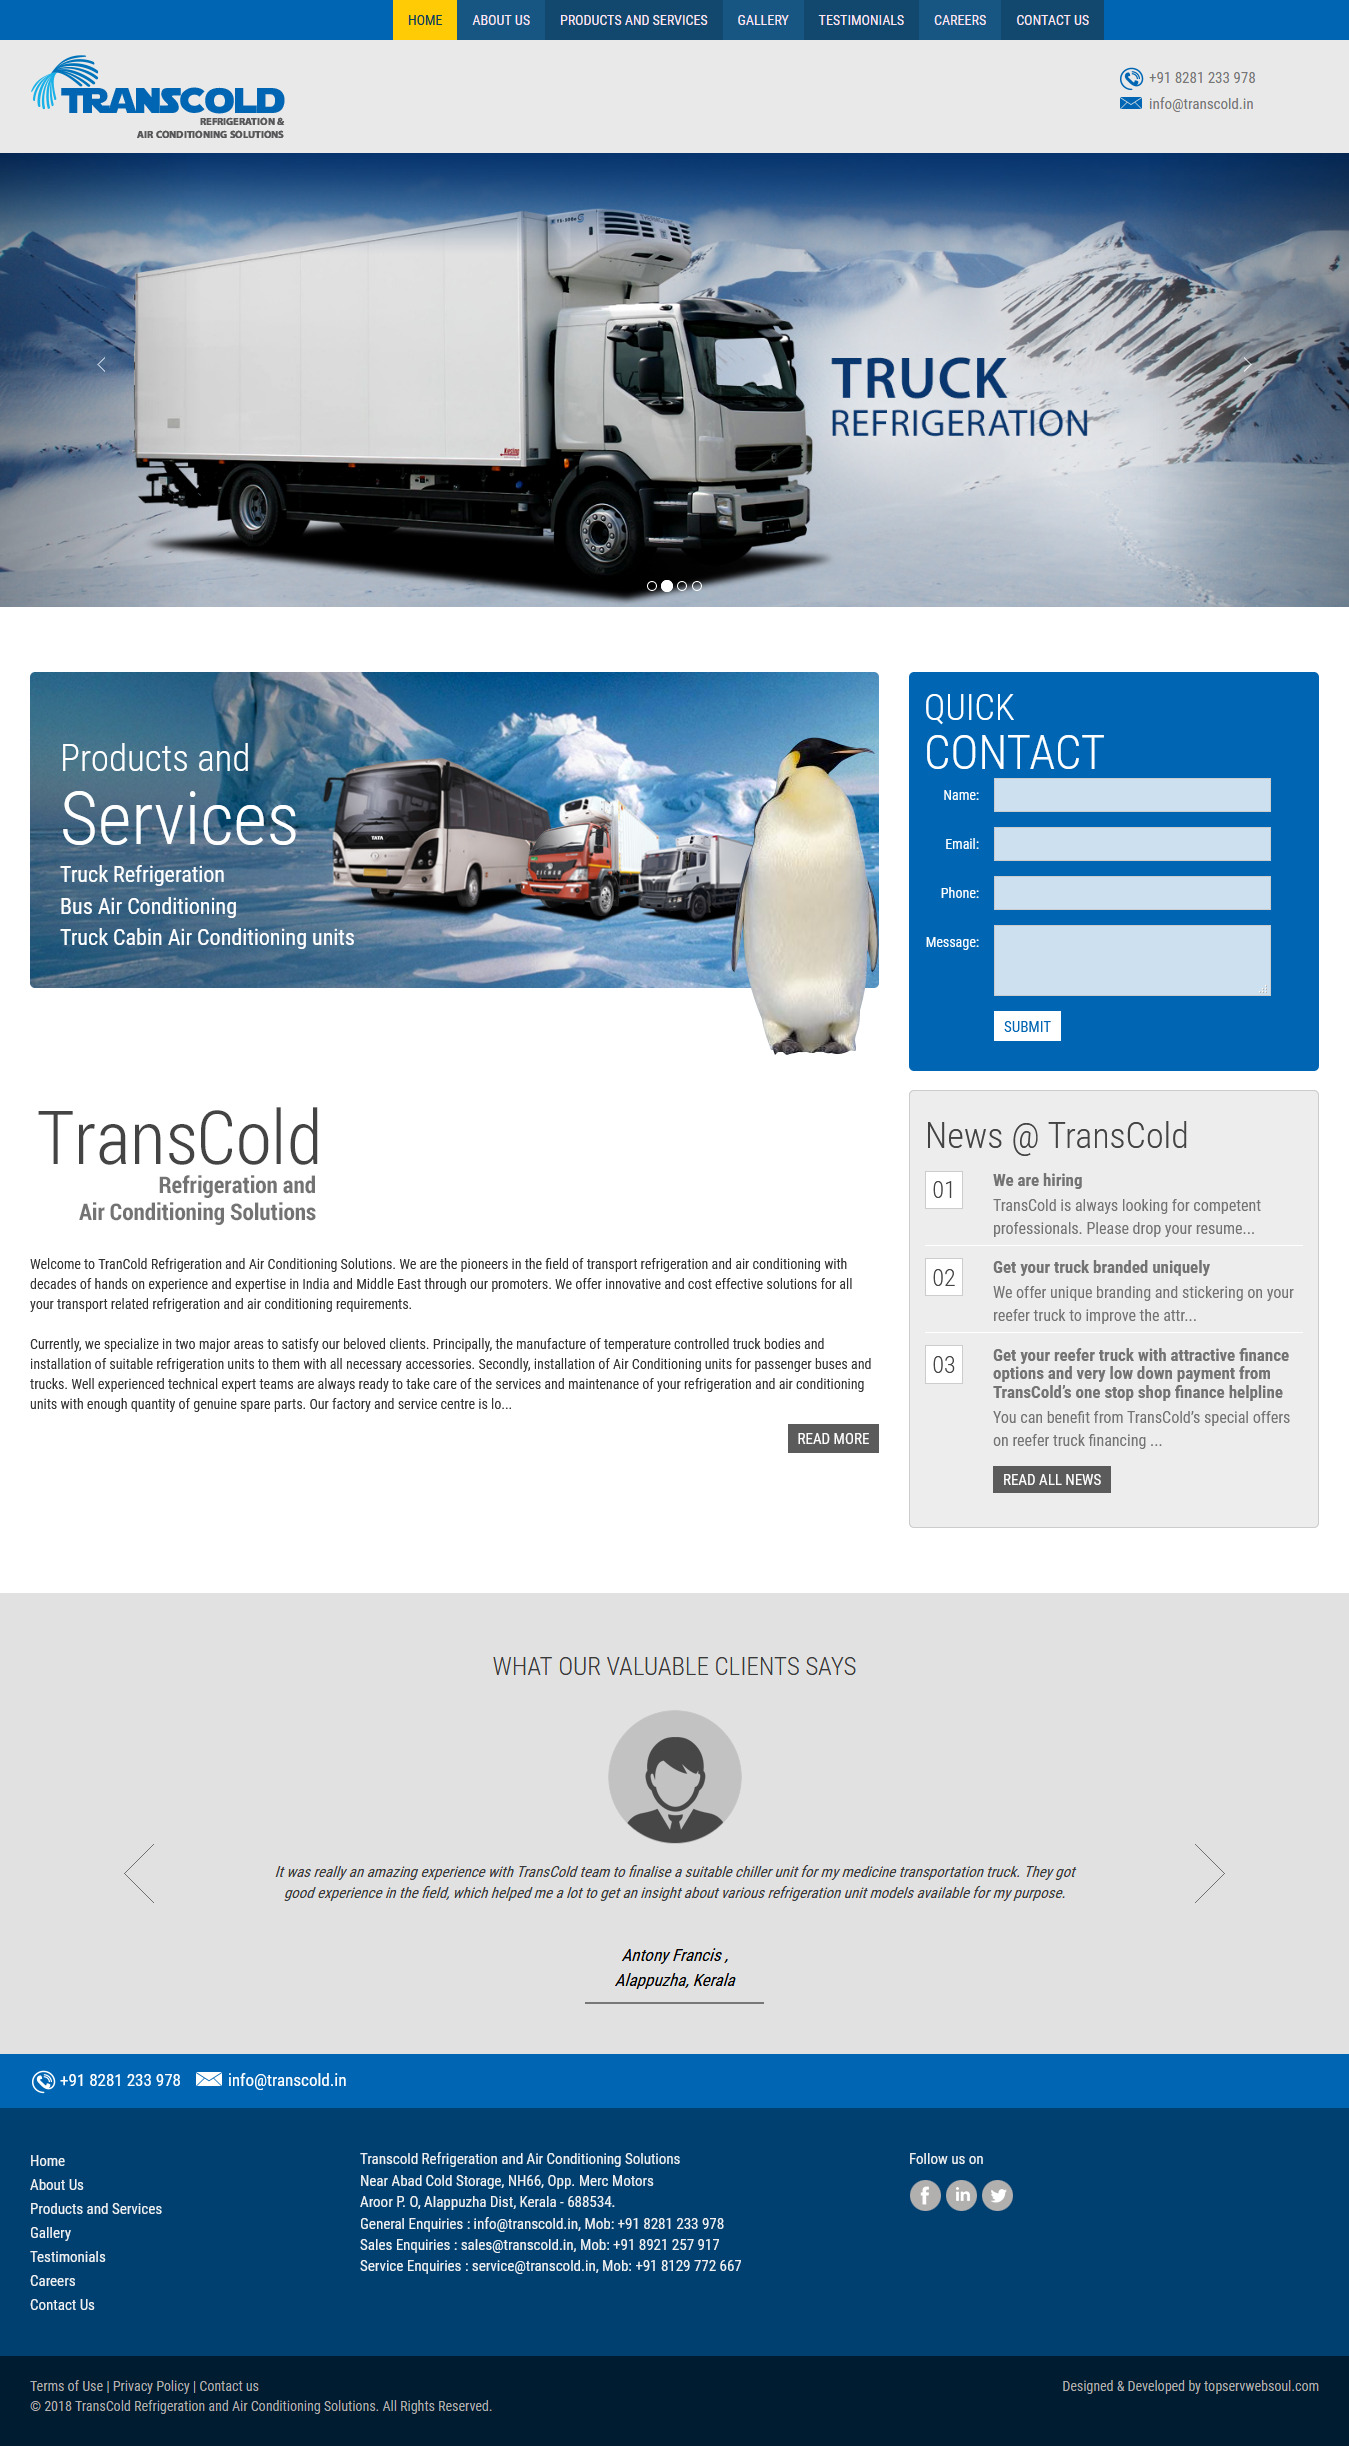 Transcold Refrigeration Air Conditioning Solutions